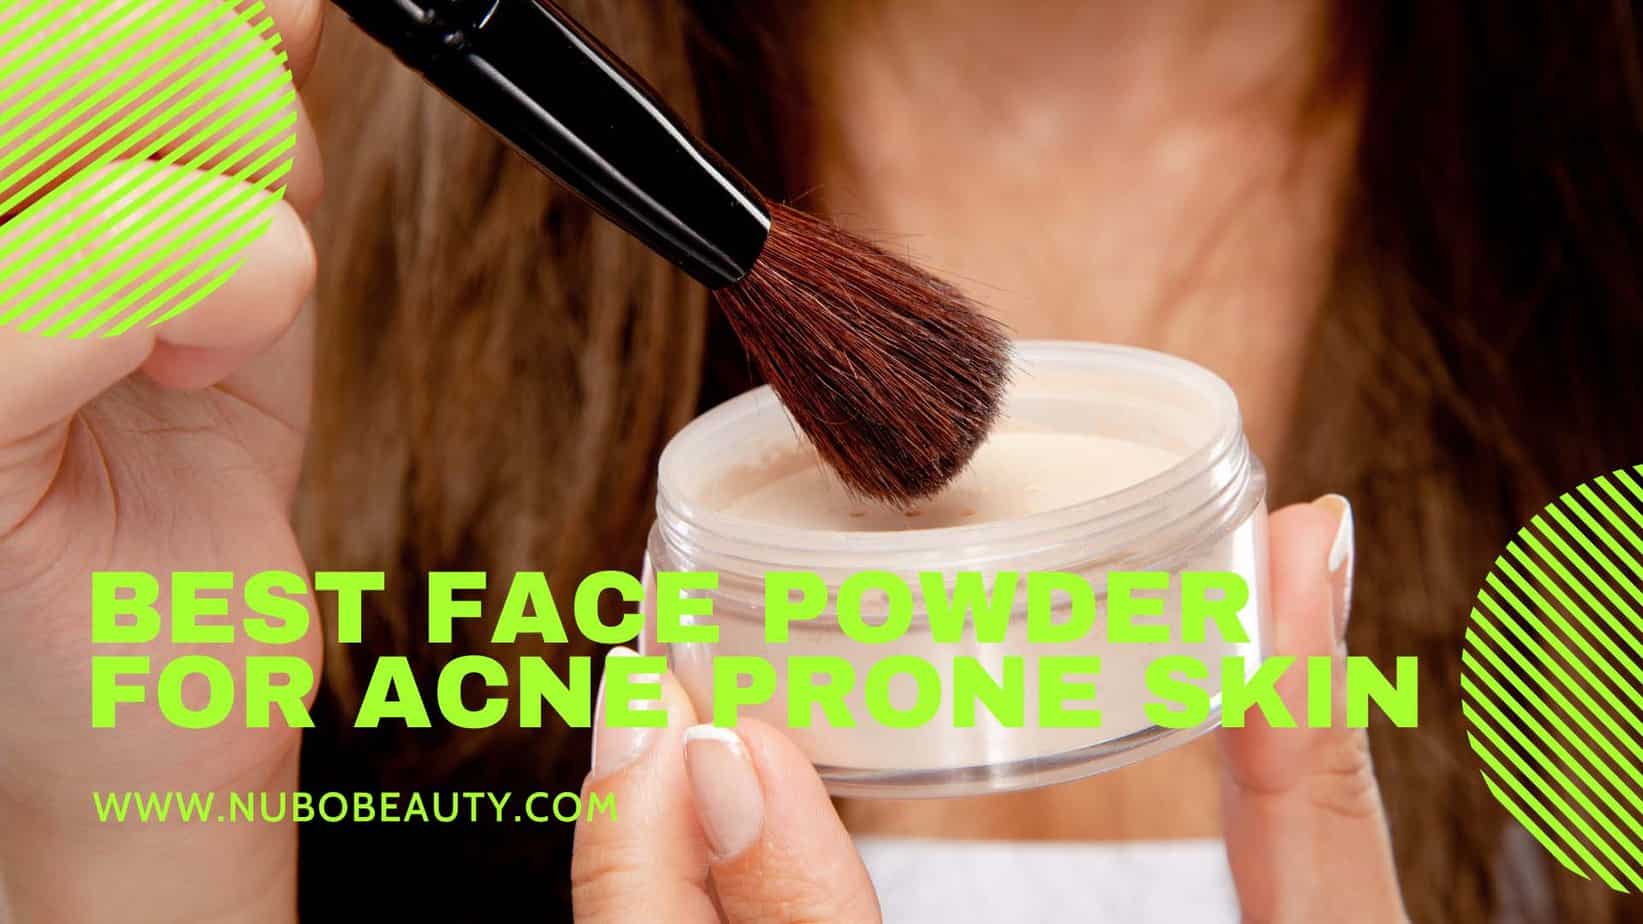 Is skin acne prone best the face what powder for Top 10